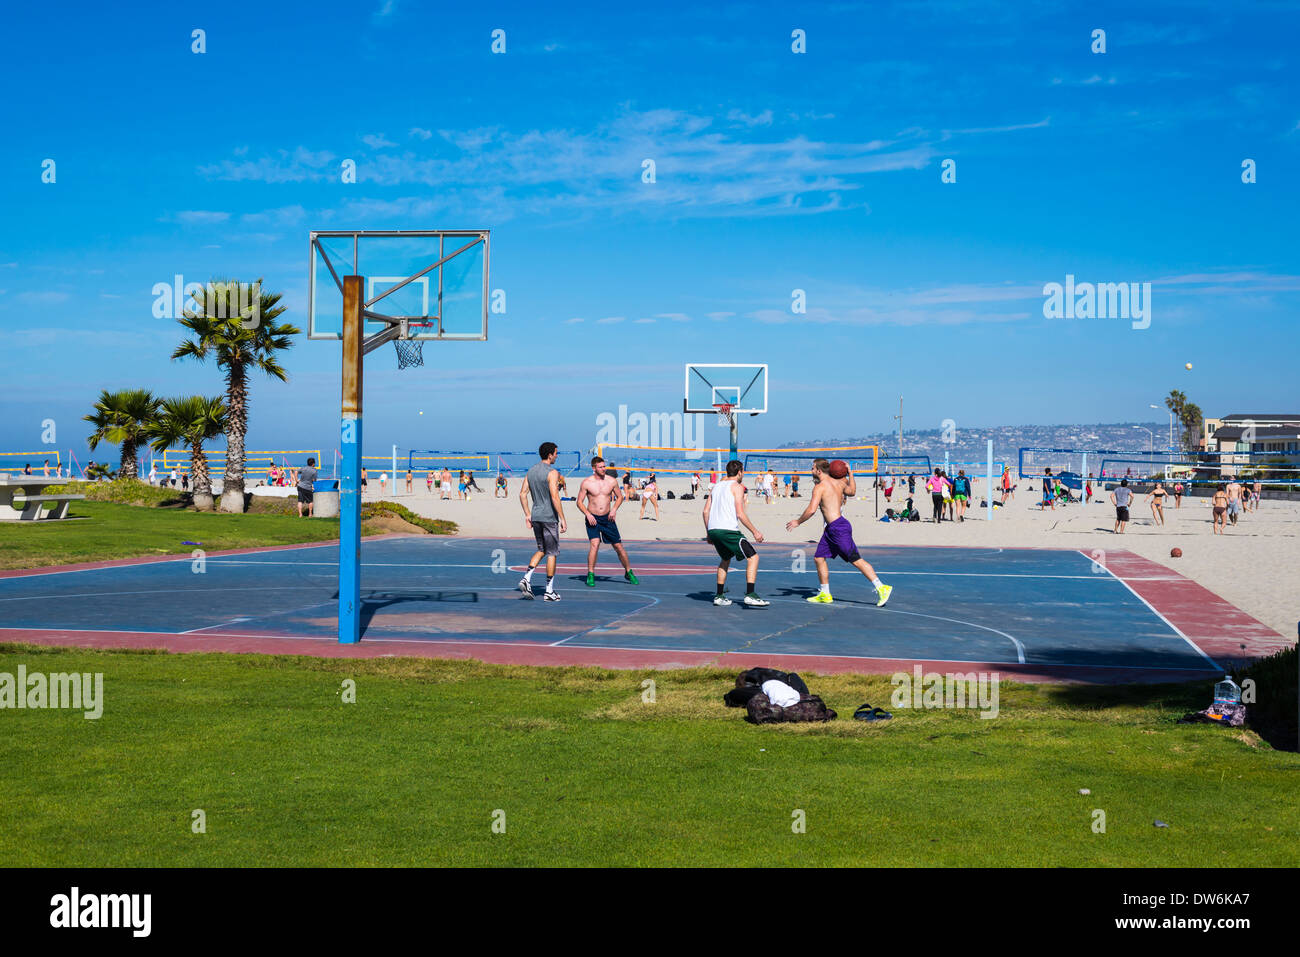 South Mission Beach Park basketball court. San Diego, California, United States. Stock Photo